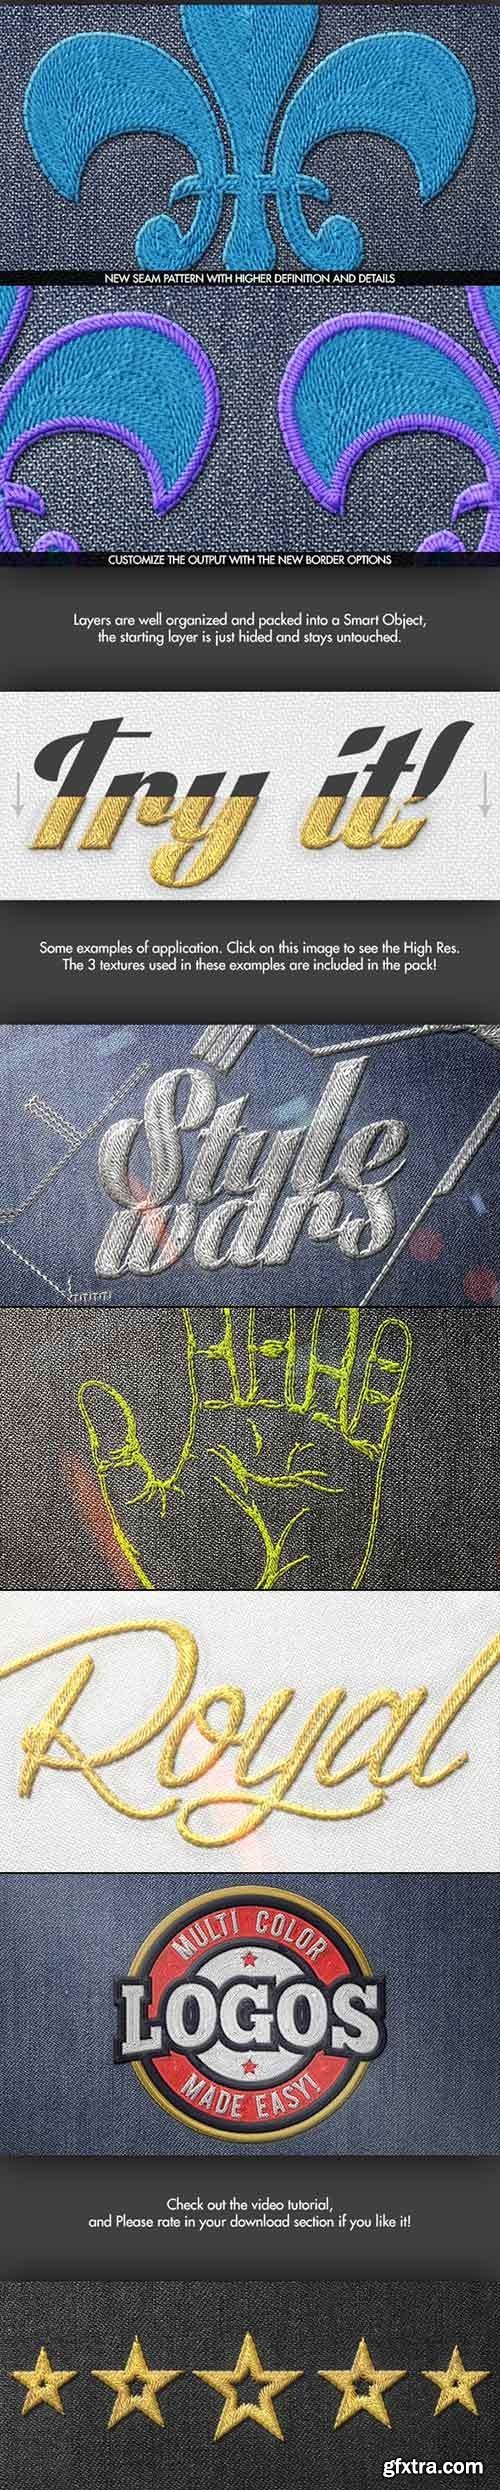 Graphicriver - Realistic Embroidery - Photoshop Actions 6913493